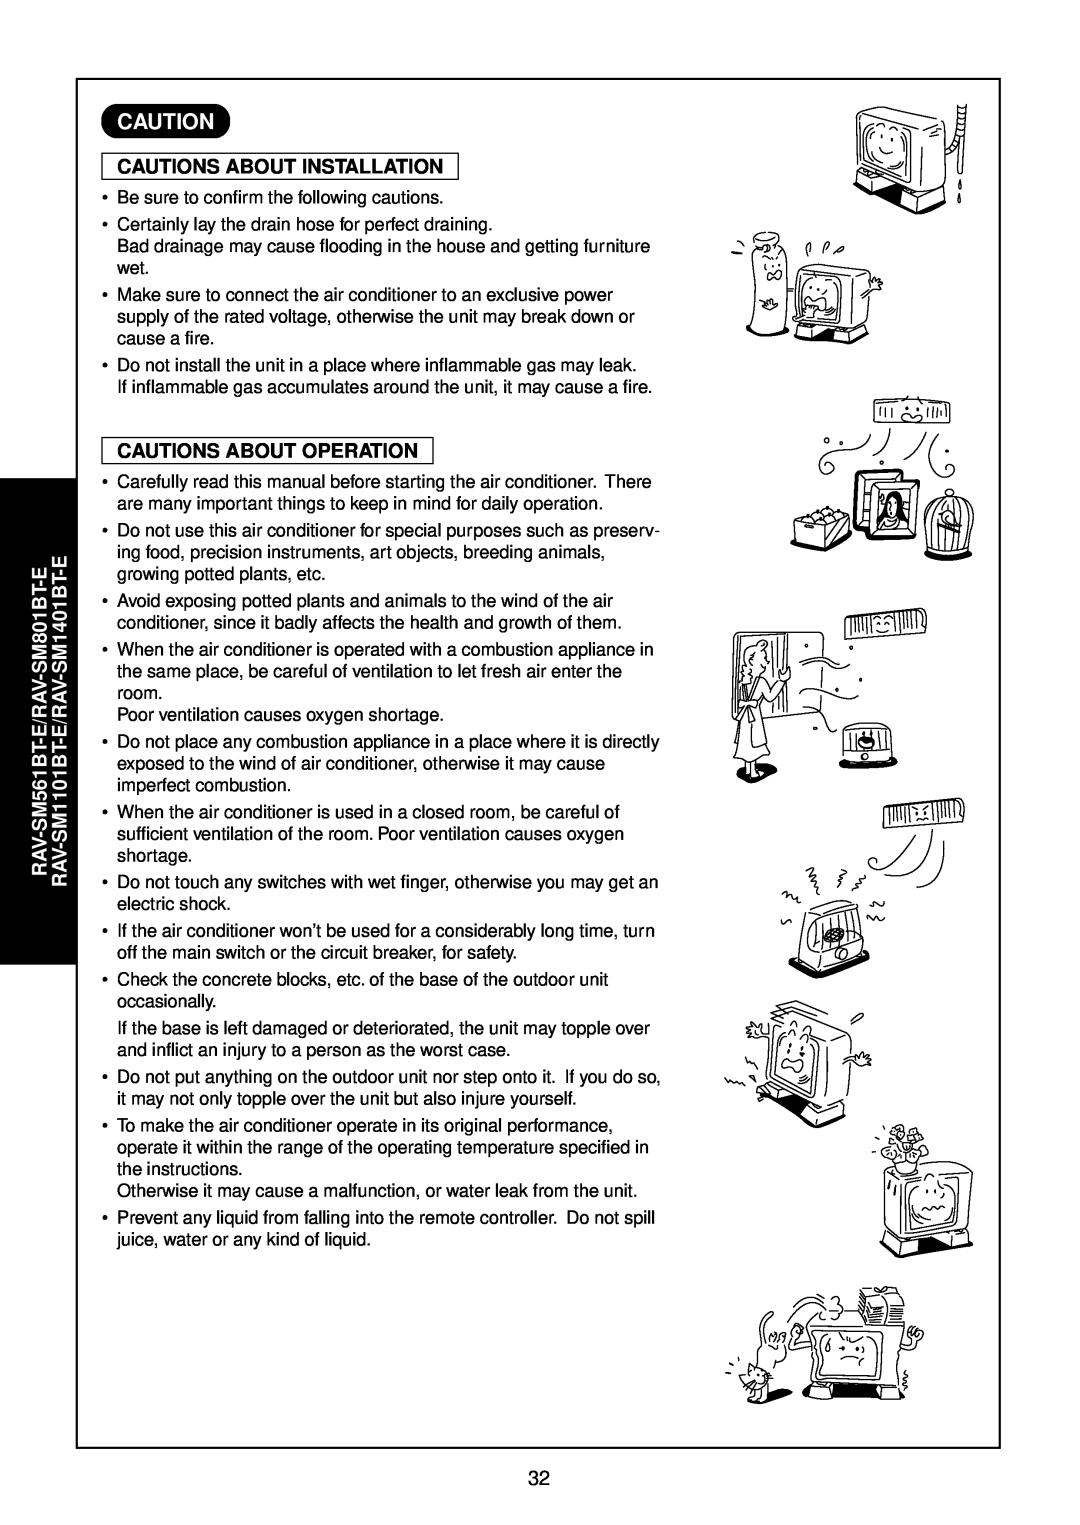 Toshiba R410A service manual Cautions About Installation, Cautions About Operation 